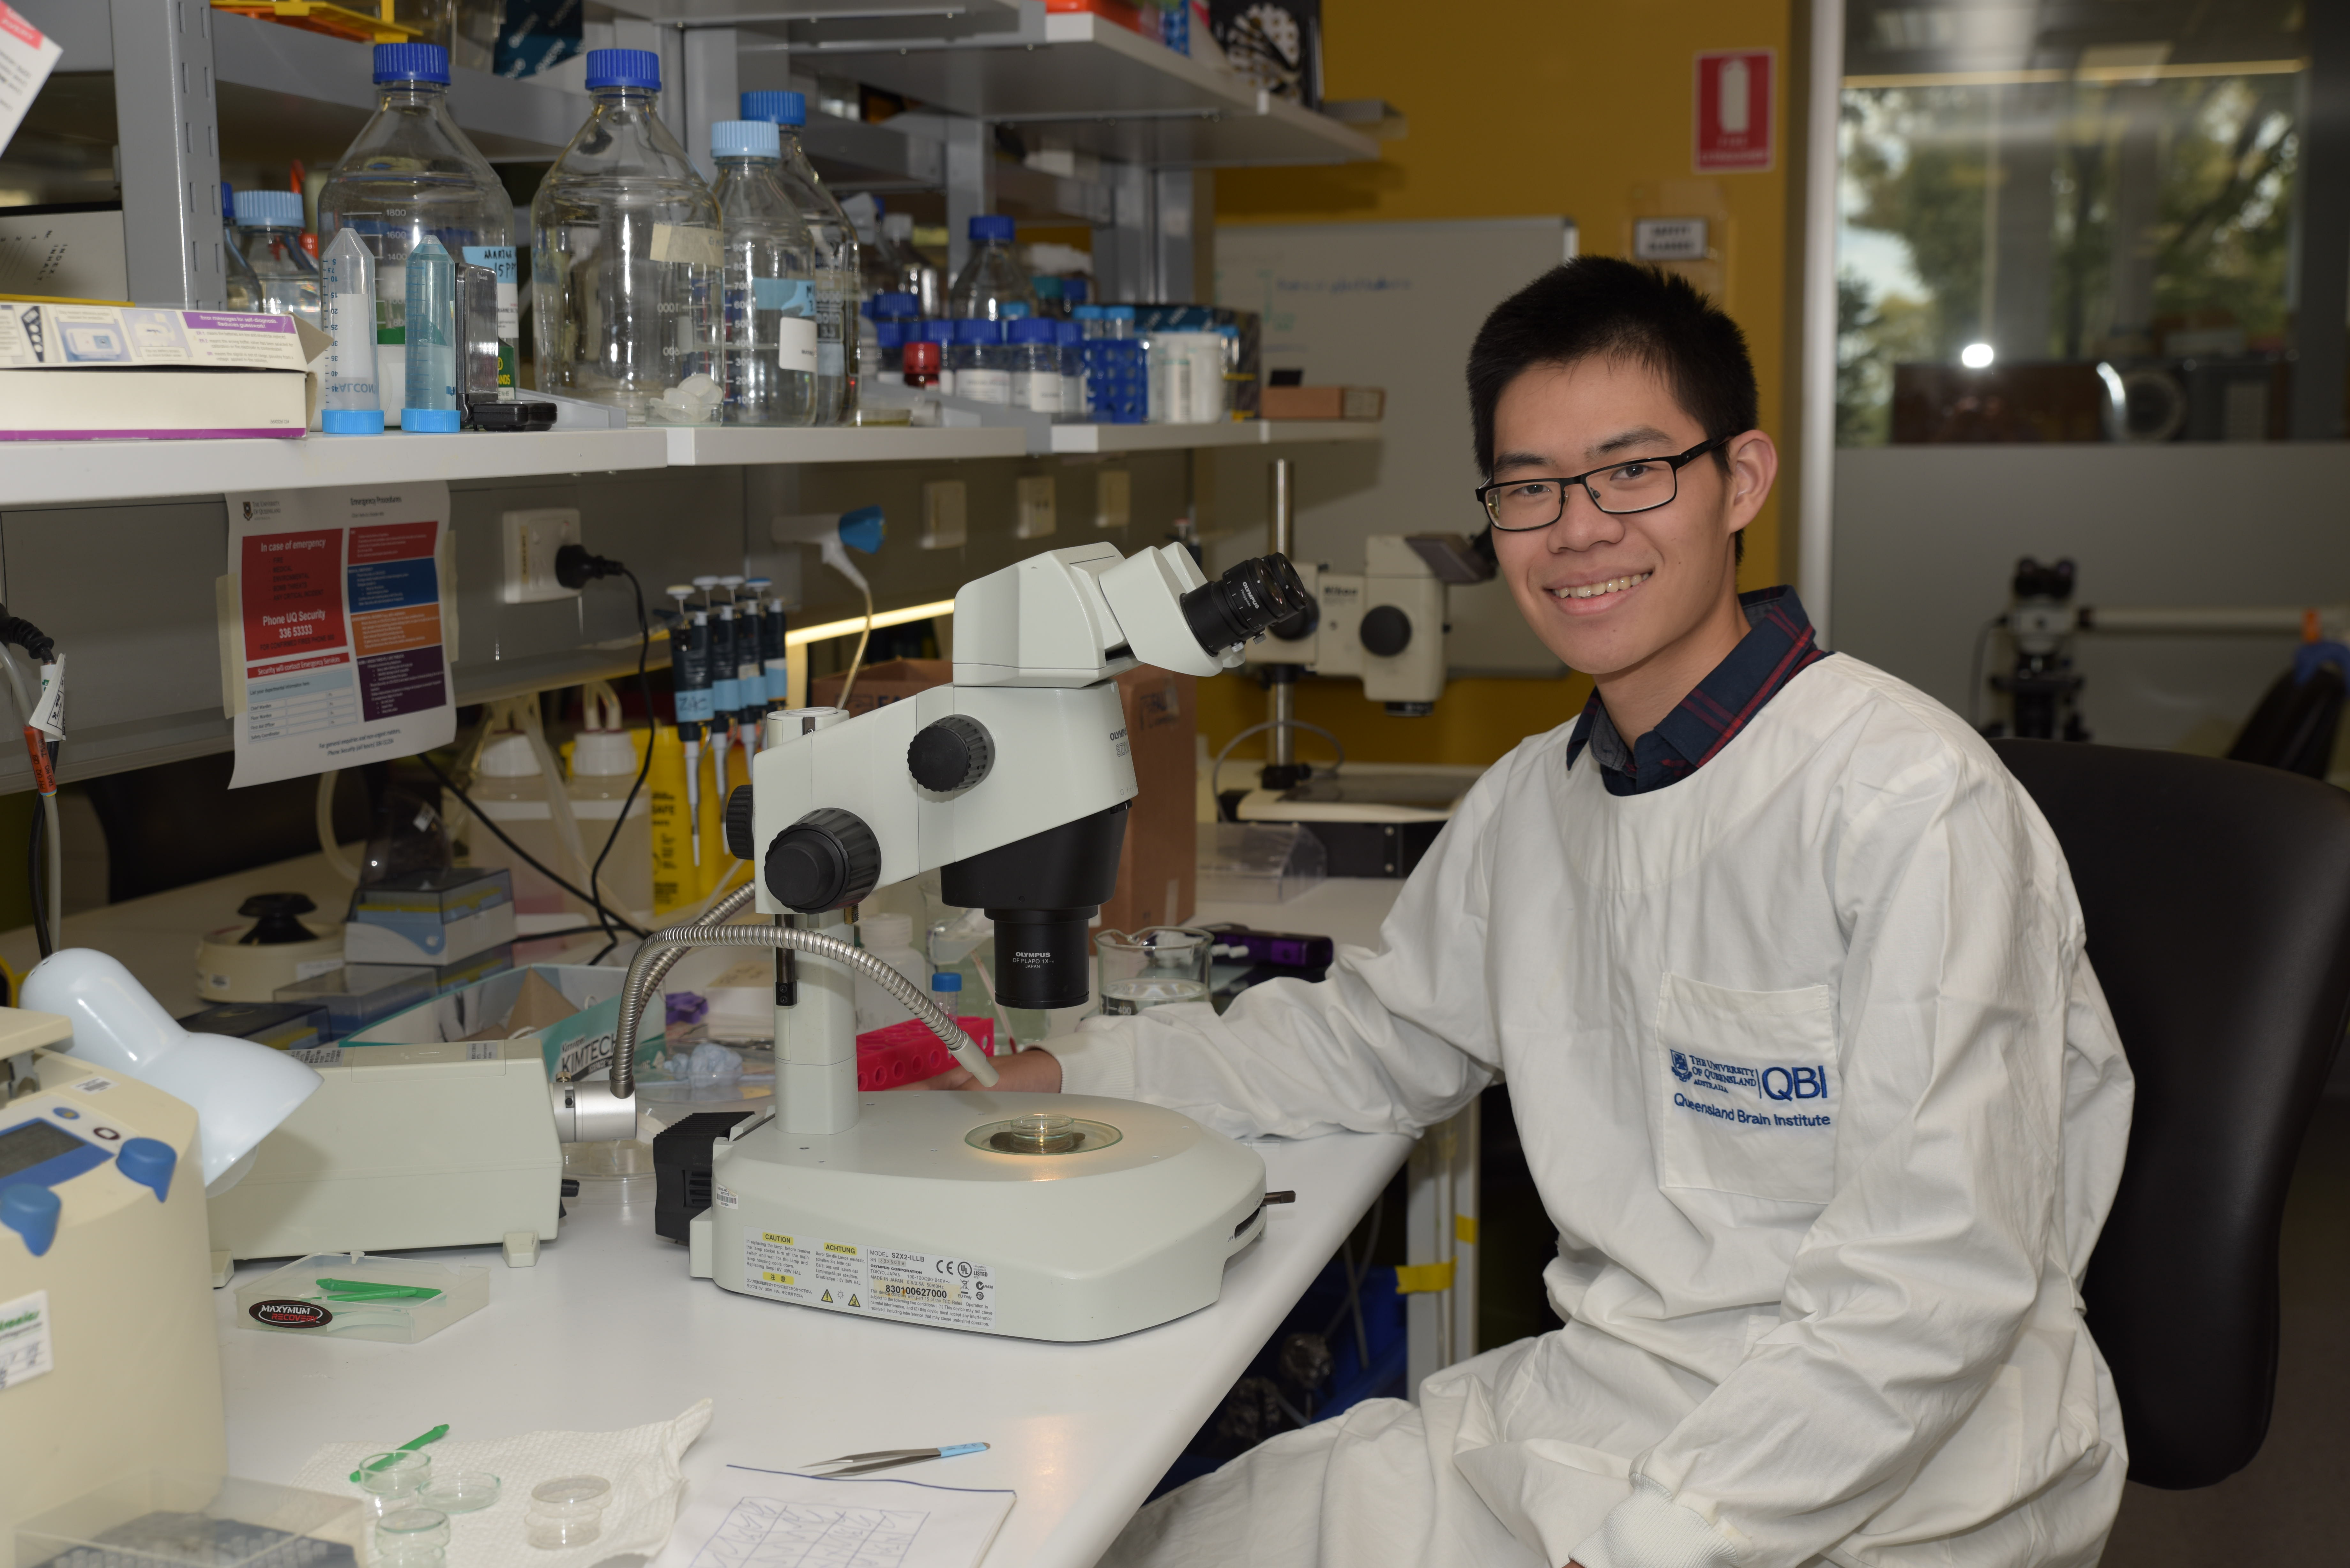 2013 International Brain Bee Winner Jackson Huang completes his internship in the lab of Geoffrey Goodhill, PhD at the University of Queensland